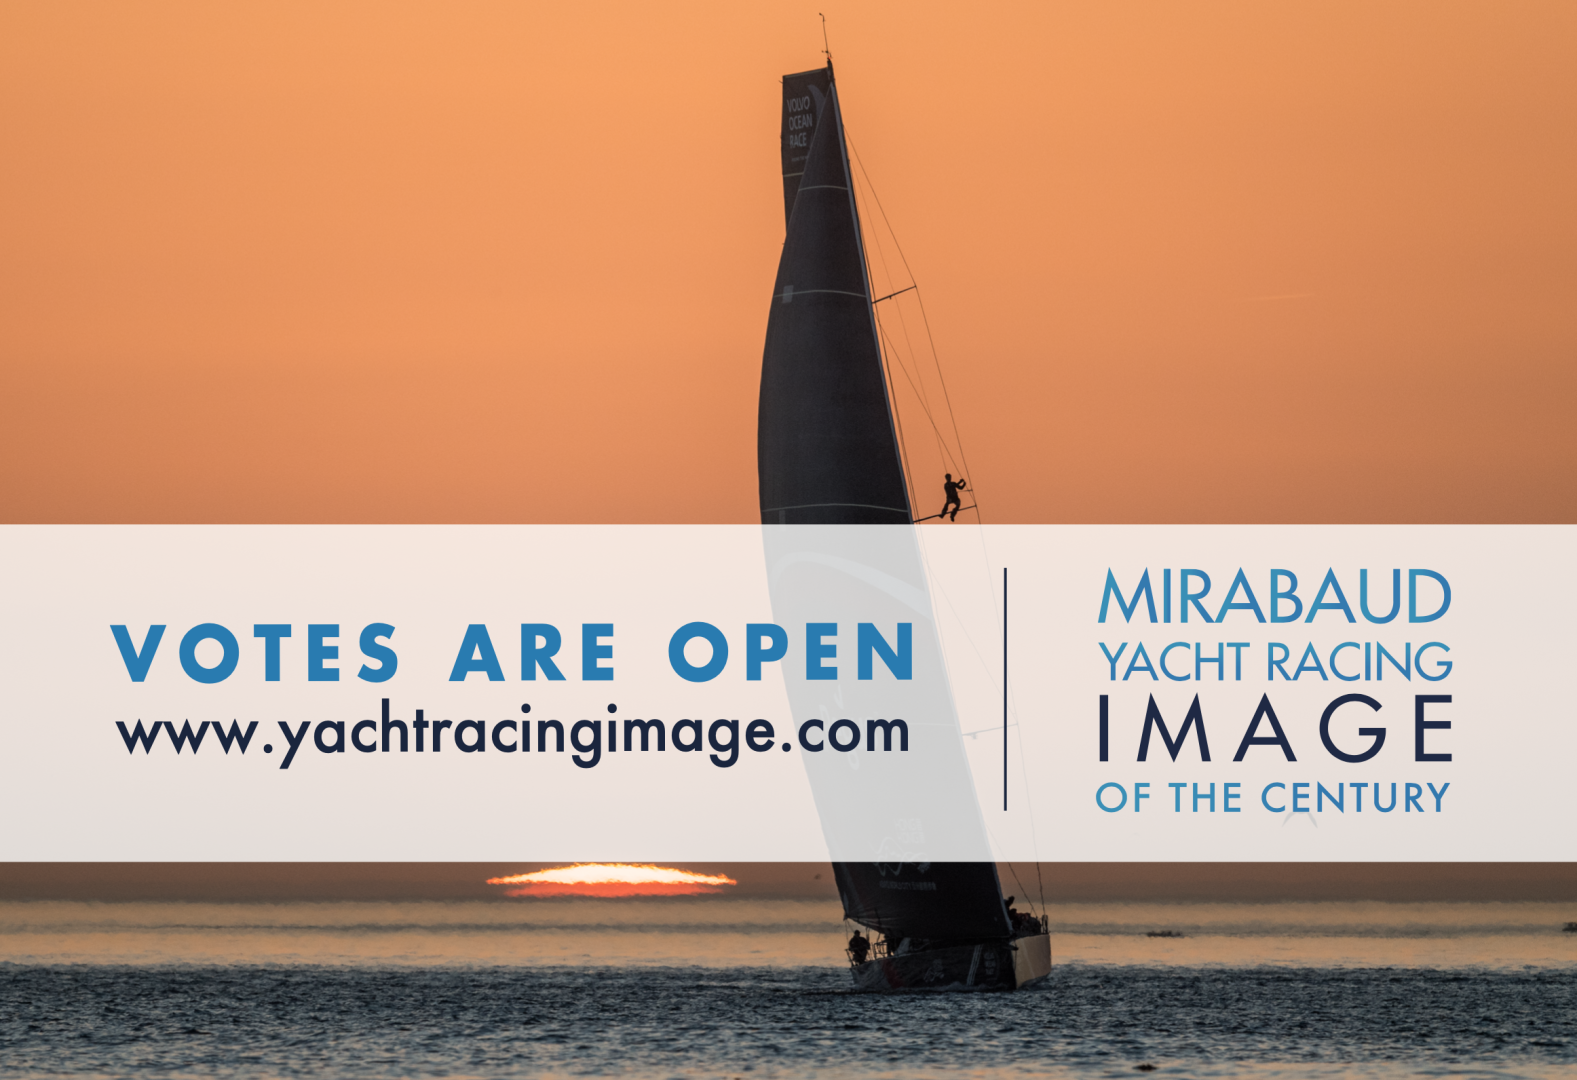 Mirabaud Yacht Racing Image: Discover the best sailing pictures